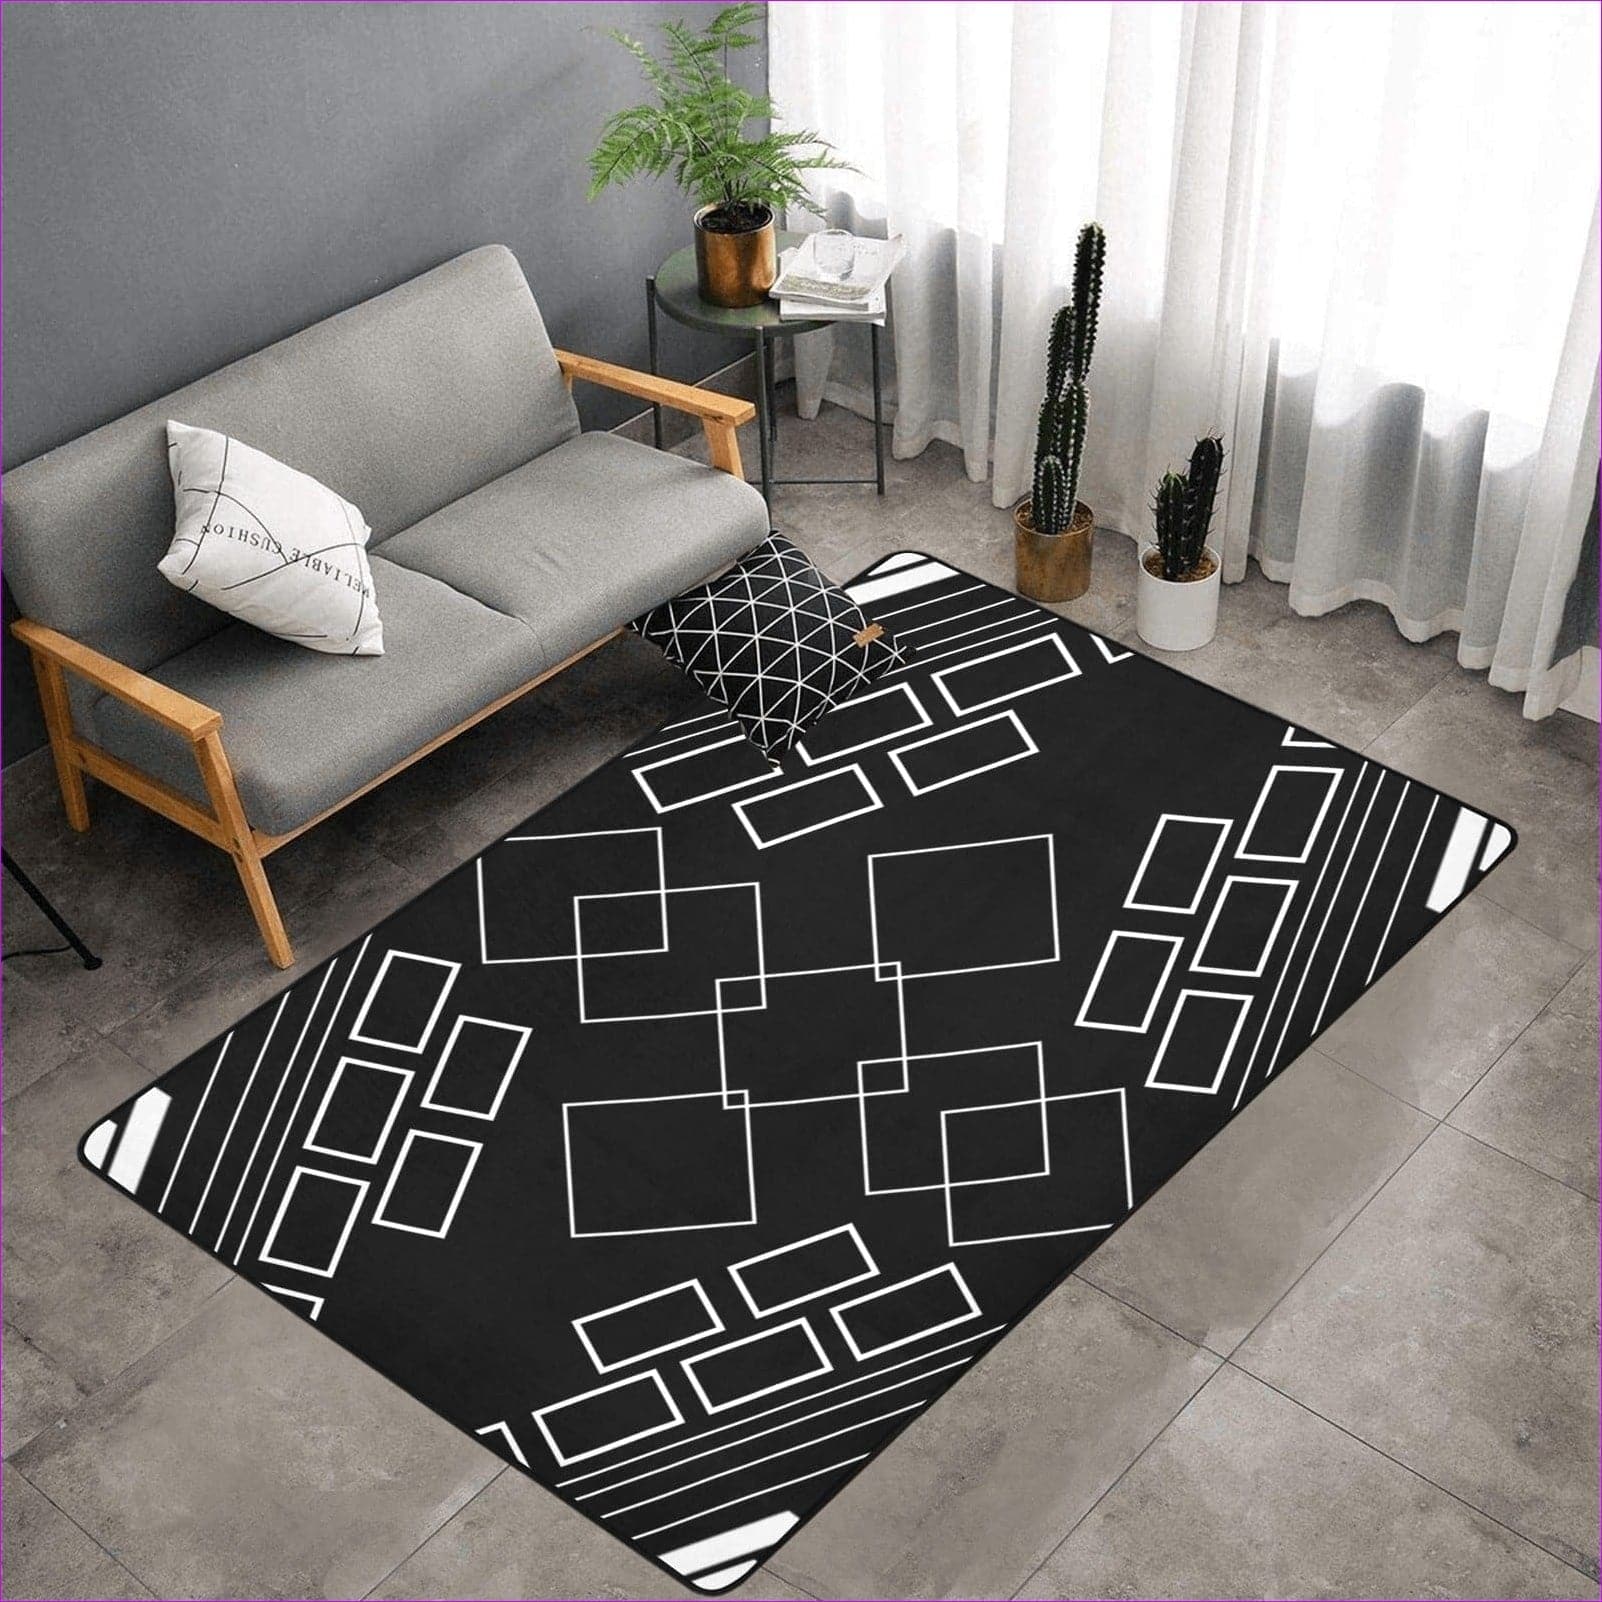 One Size shaped out Area Rug with Black Binding 7'x5' - Shaped Out Area Rug with Black Binding 7'x5' (3 colors) - area rug at TFC&H Co.